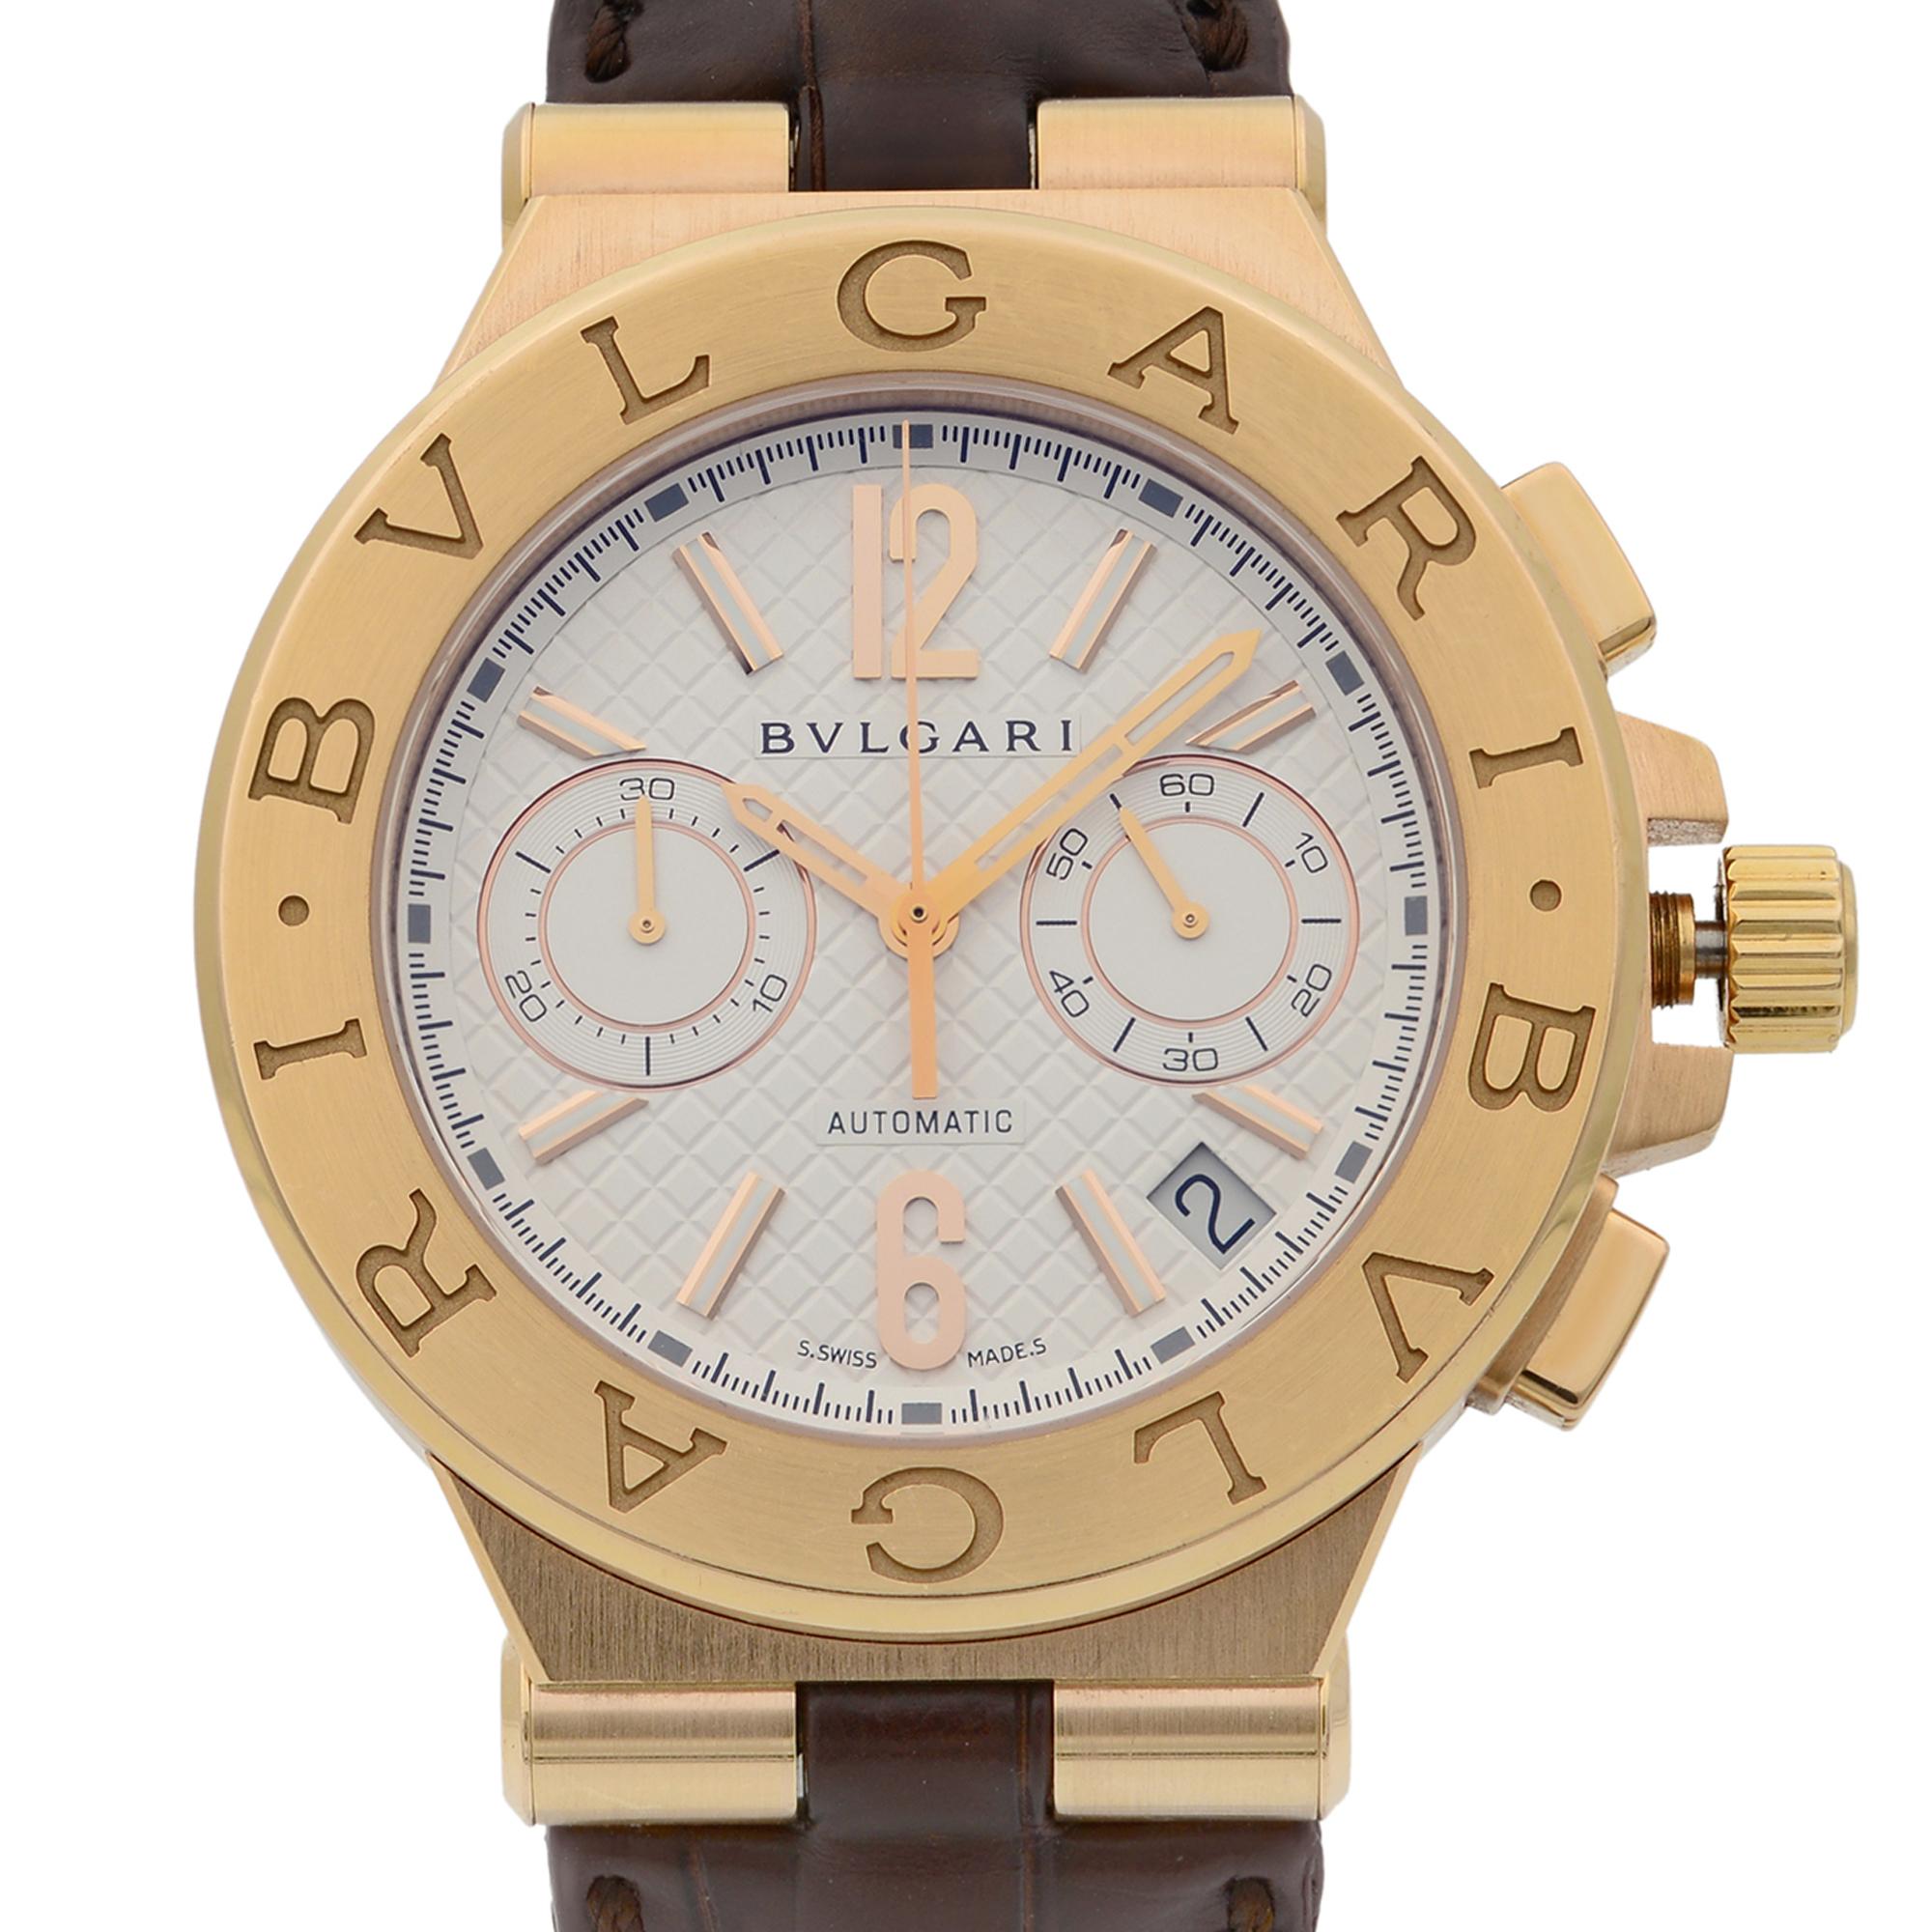 This pre-owned Bvlgari Diagono DGP40GCH is a beautiful men's timepiece that is powered by japanese automatic movement which is cased in a rose gold case. It has a round shape face,  dial and has hand sticks & numerals style markers. The case size is